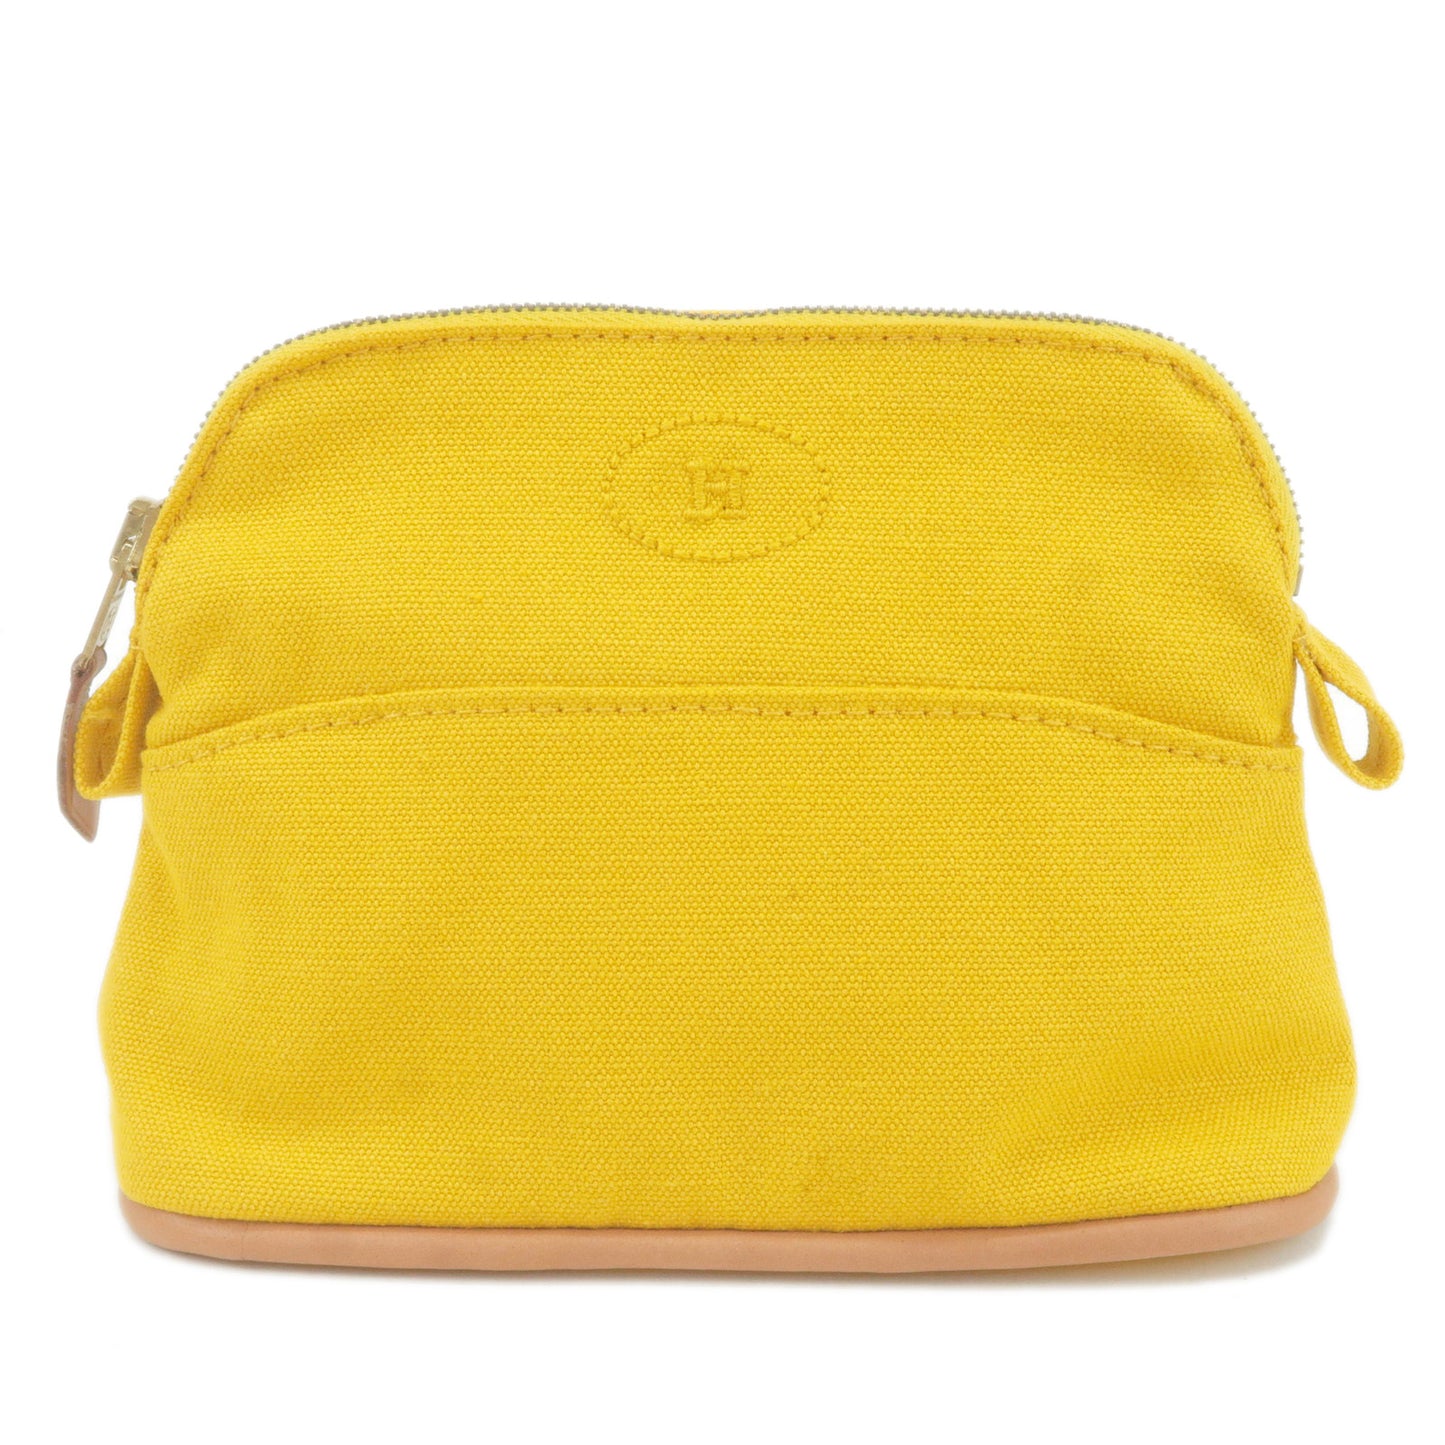 HERMES-Canvas-Leather-Bolide-Mini-Pouch-Cosmetics-Bag-Yellow